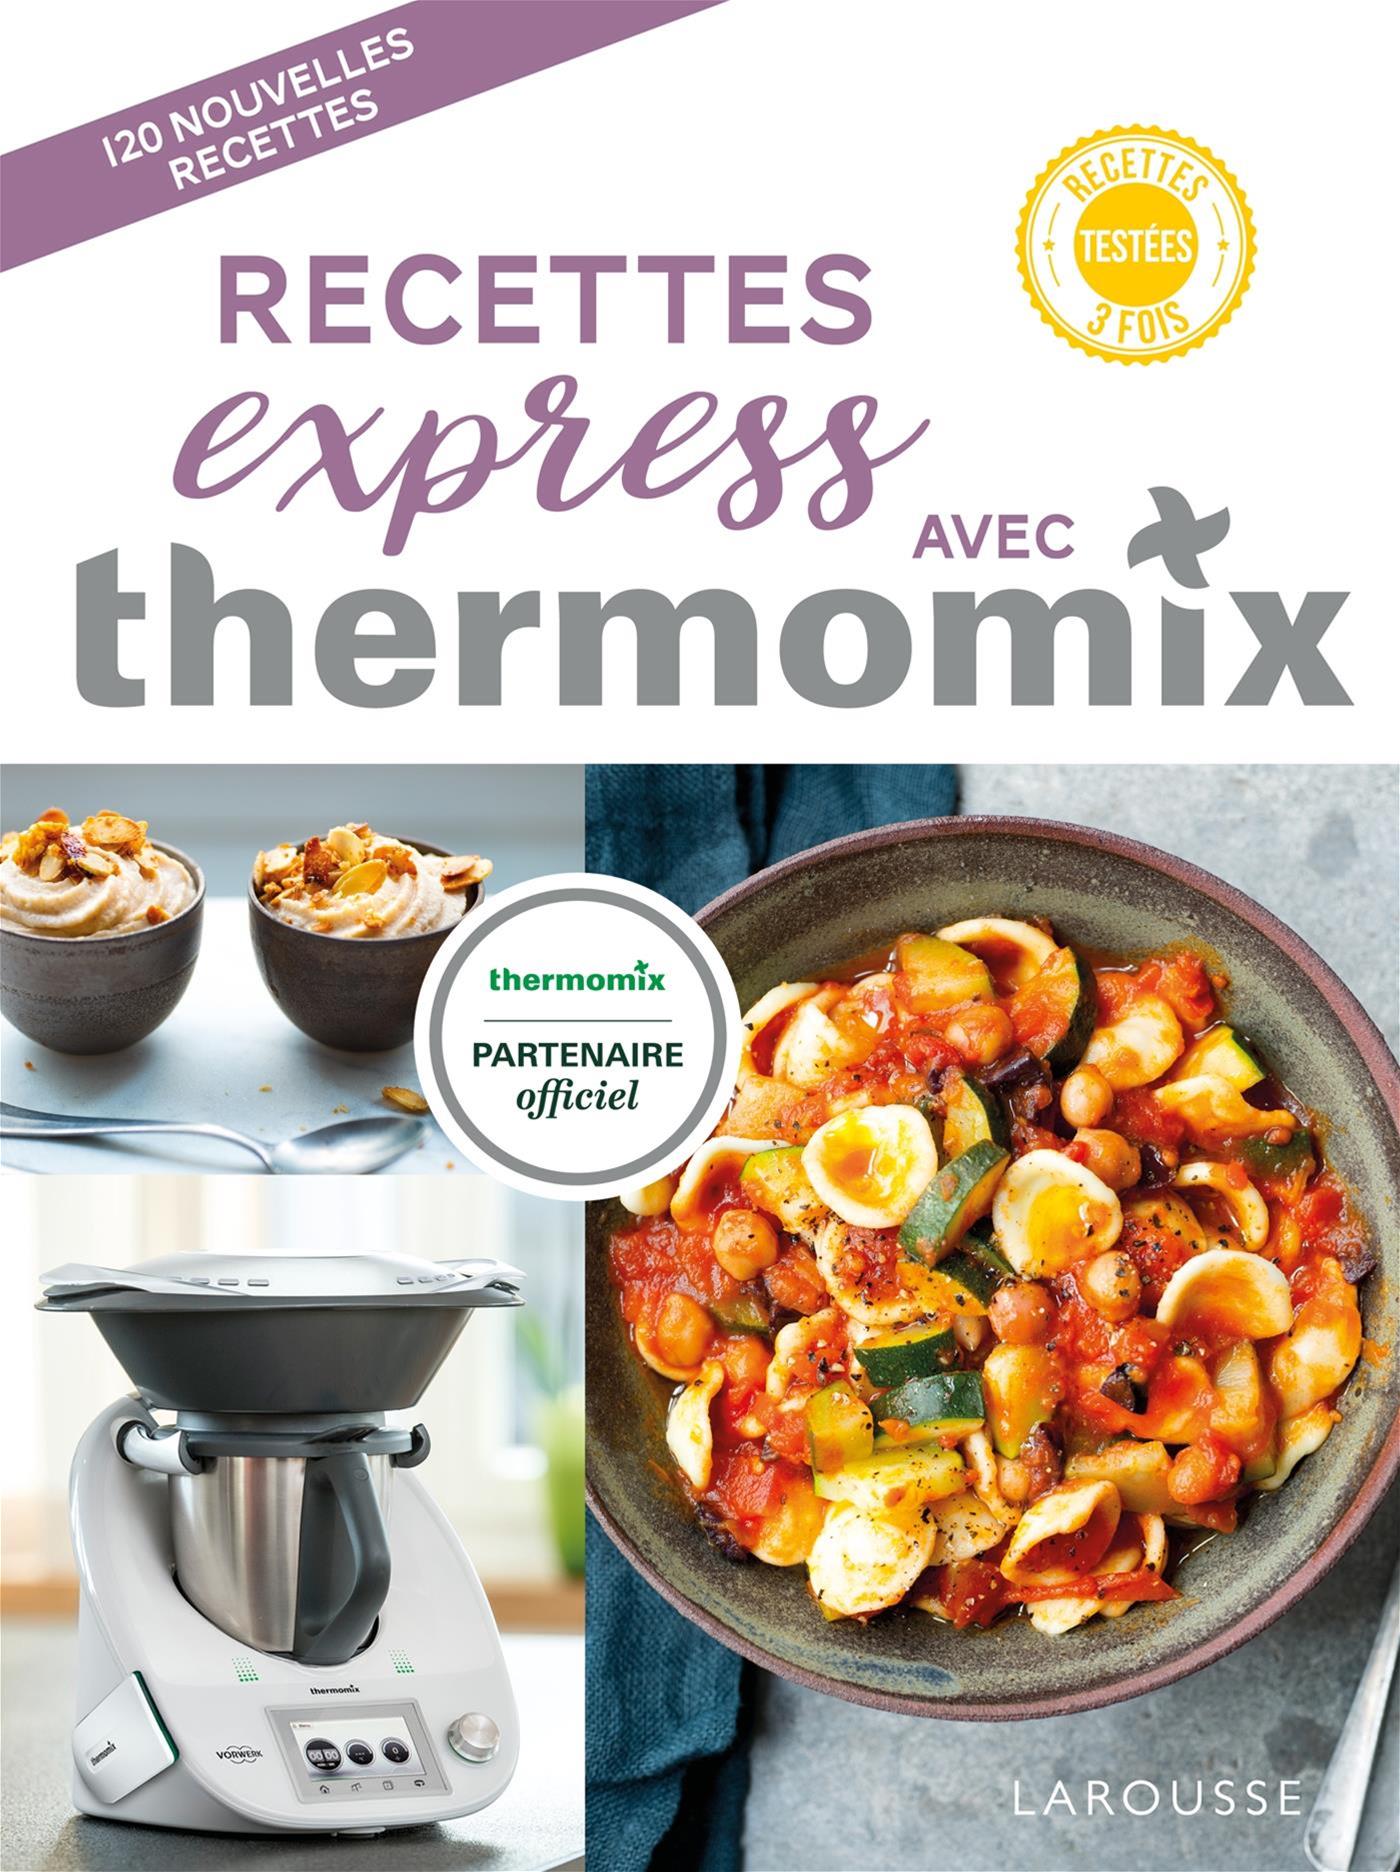 FREE CLASS ON HOW TO USE THE TM5 THERMOMIX - La Guilde Culinaire